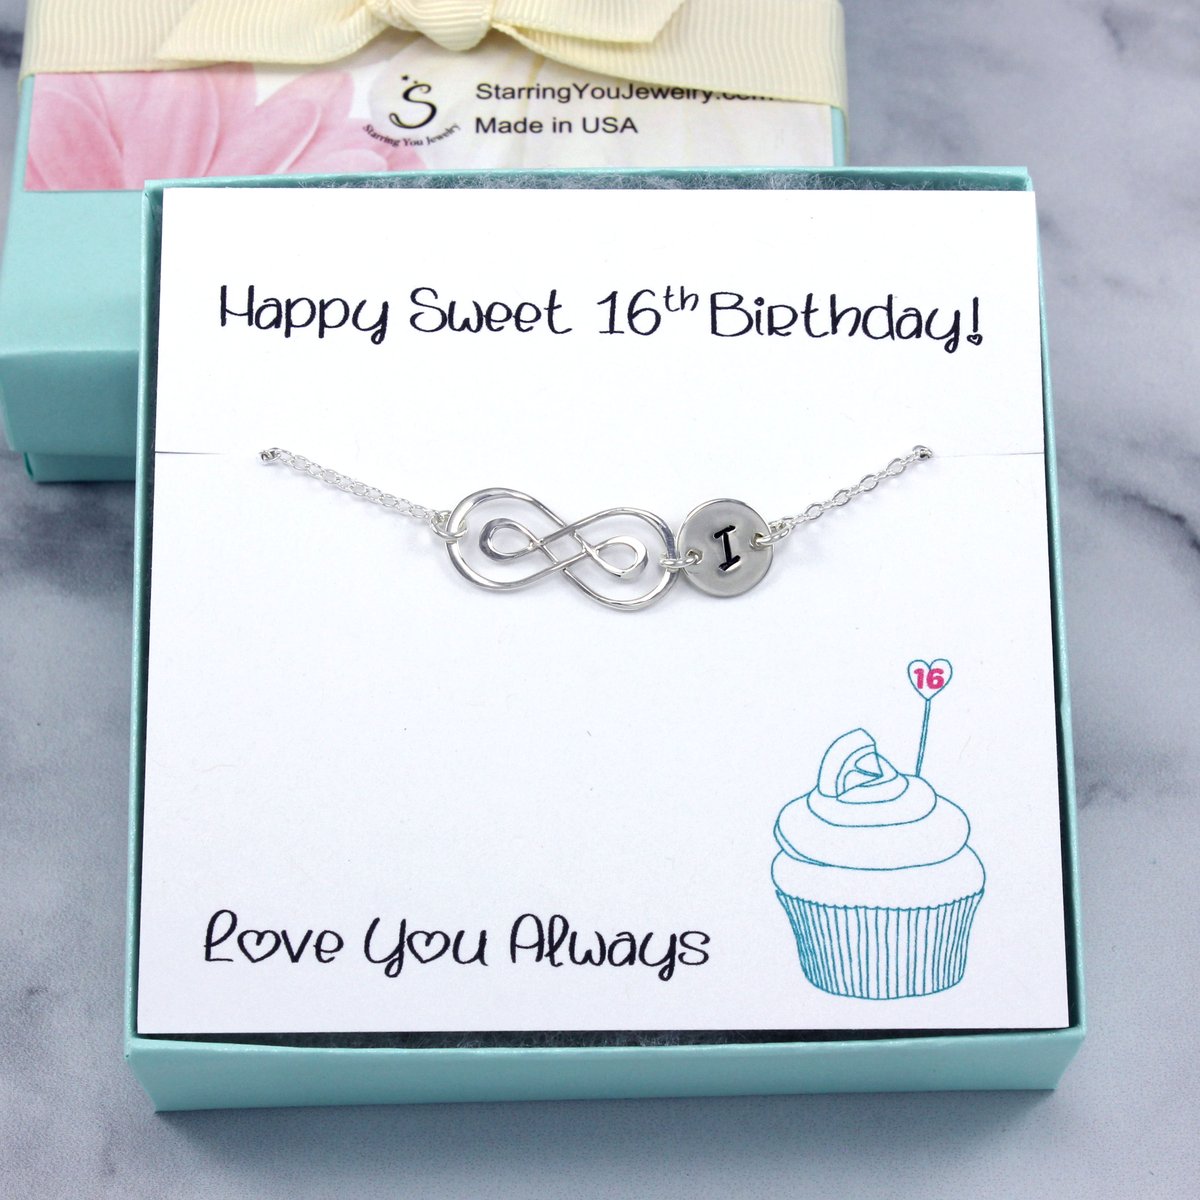 Sweet 16 Gift: personalized infinity bracelet in sterling silver 🎁creatoriq.cc/3G5NObu #etsy #etsyfinds #etsygifts #sweet16gift #sweetsixteengift #sweetsixteen #giftsfordaughter #daughtergifts #giftideas #handmadejewelry #bracelet #personalizedgifts #shopsmall #birthdaygift